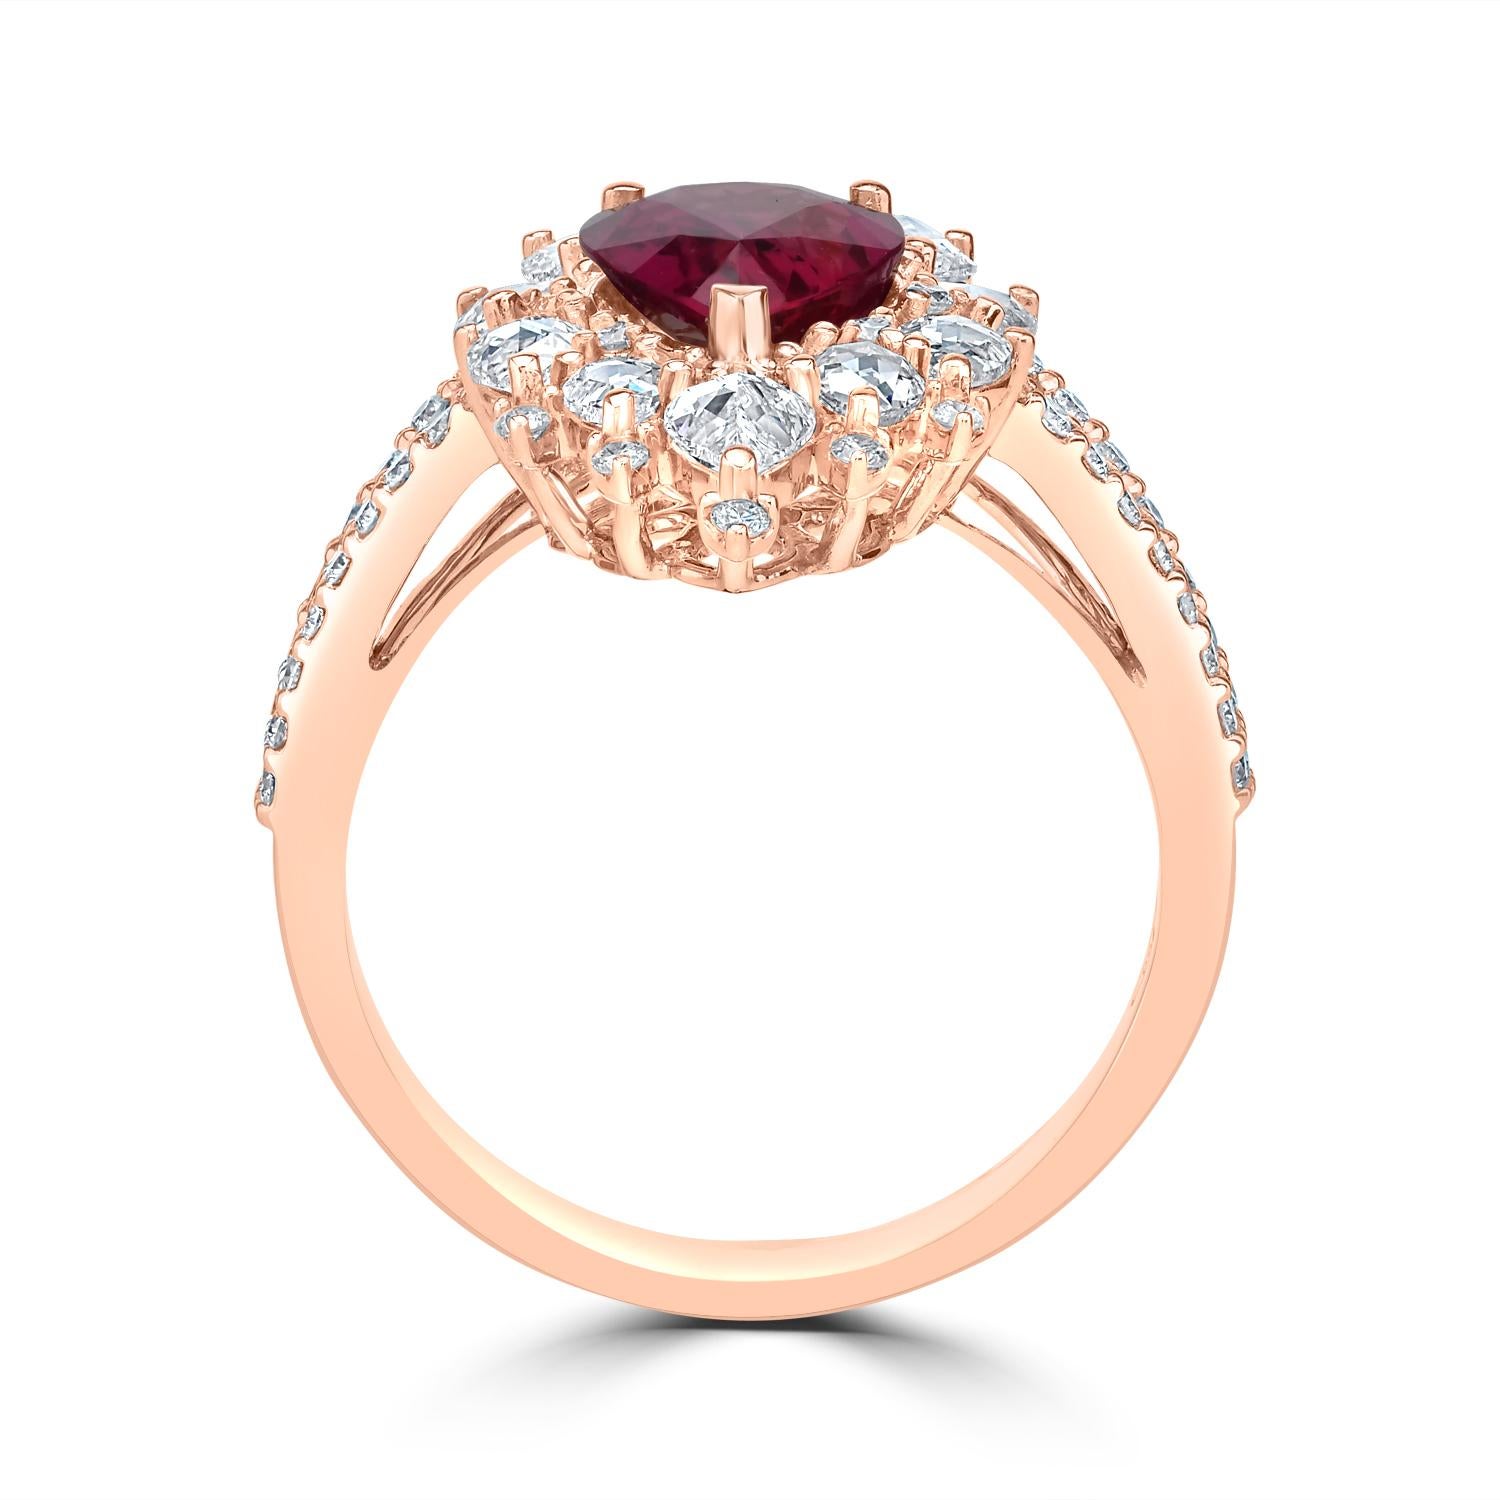 Introducing a truly stunning and captivating piece of jewelry - the 18K Rose Gold Ring with 2.21 carat No Heat Winza Ruby and 1.50 carats of Pear Shaped Rose Cut Diamonds. This exquisite ring is a true testament to the beauty and rarity of fine